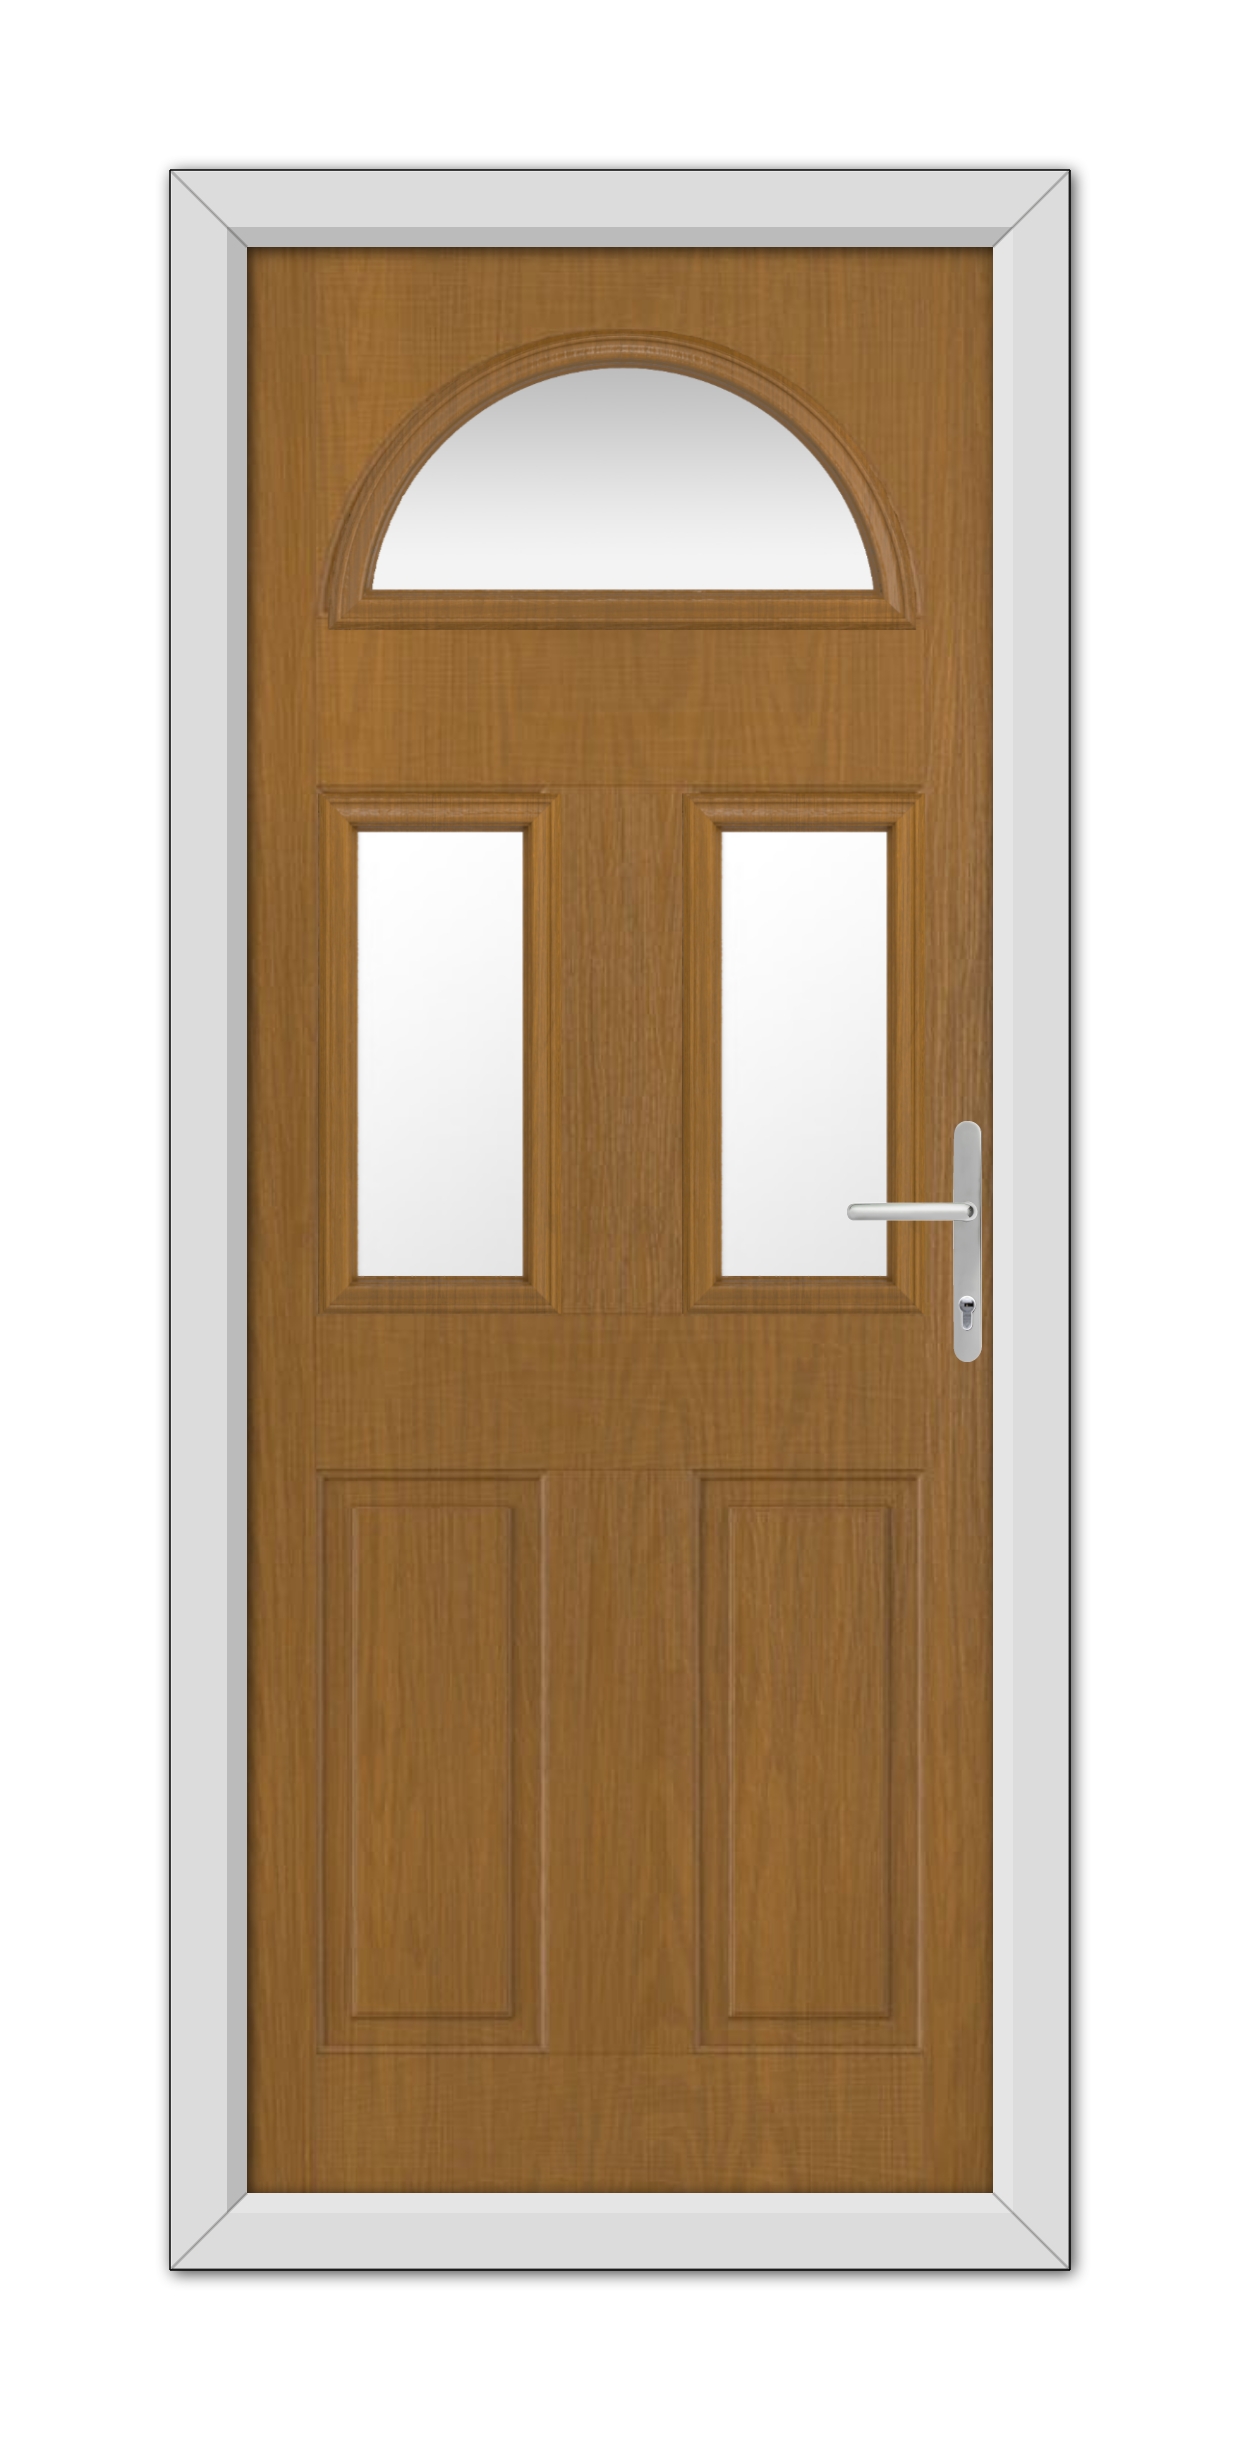 A Oak Winslow 3 Composite Door 48mm Timber Core with a semicircular window at the top and two smaller rectangular windows, featuring a white handle and frame.